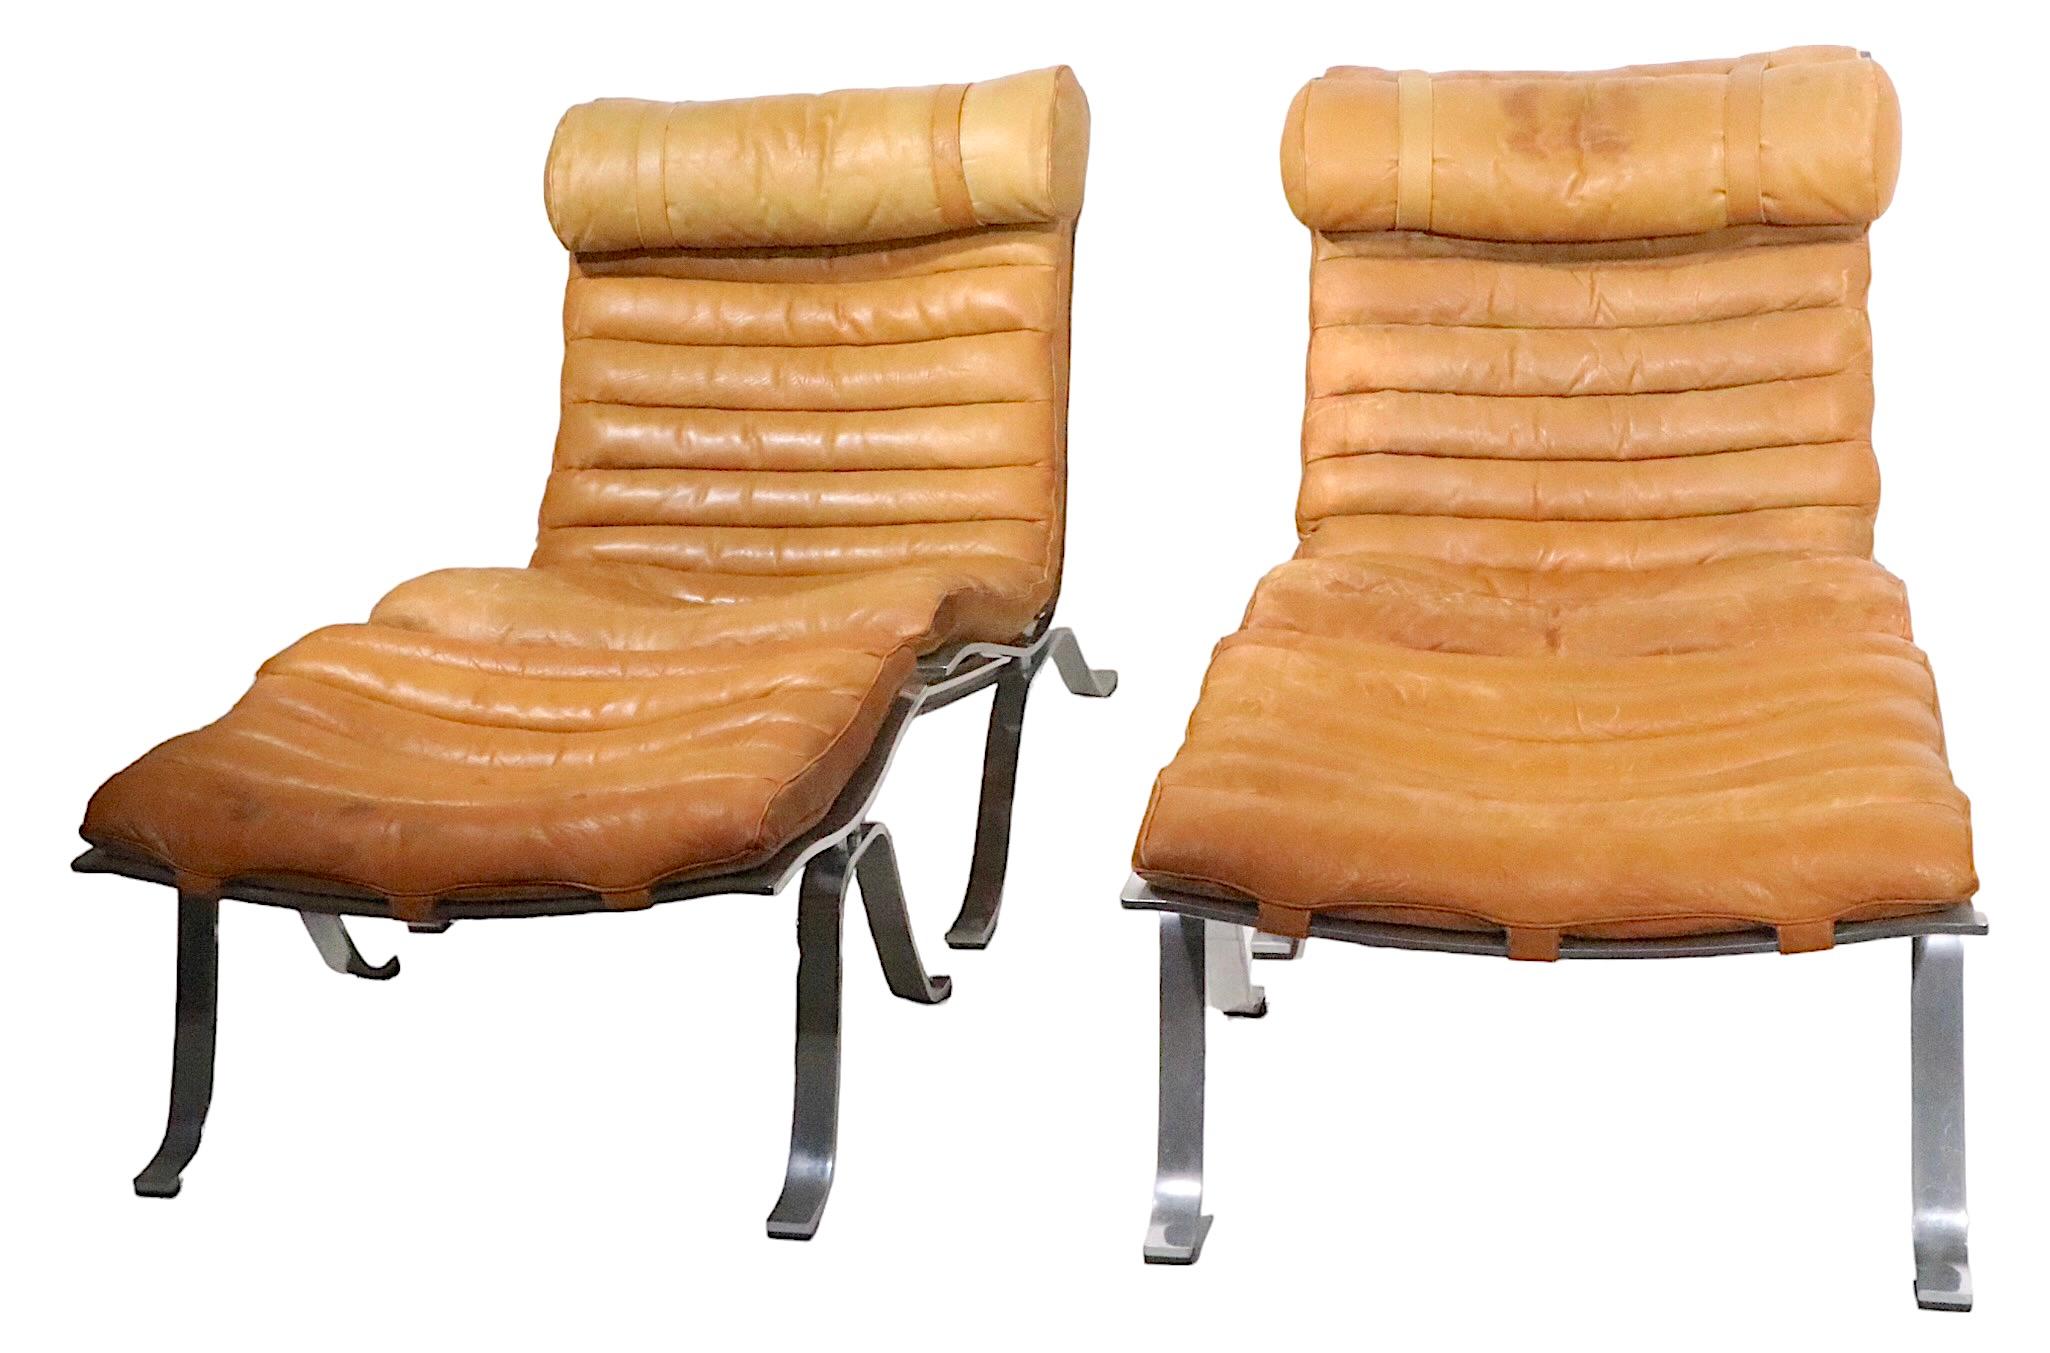 Pr. Ari Lounge Chairs with Ottomans by Arne Norell Made in Sweden c. 1960's For Sale 3